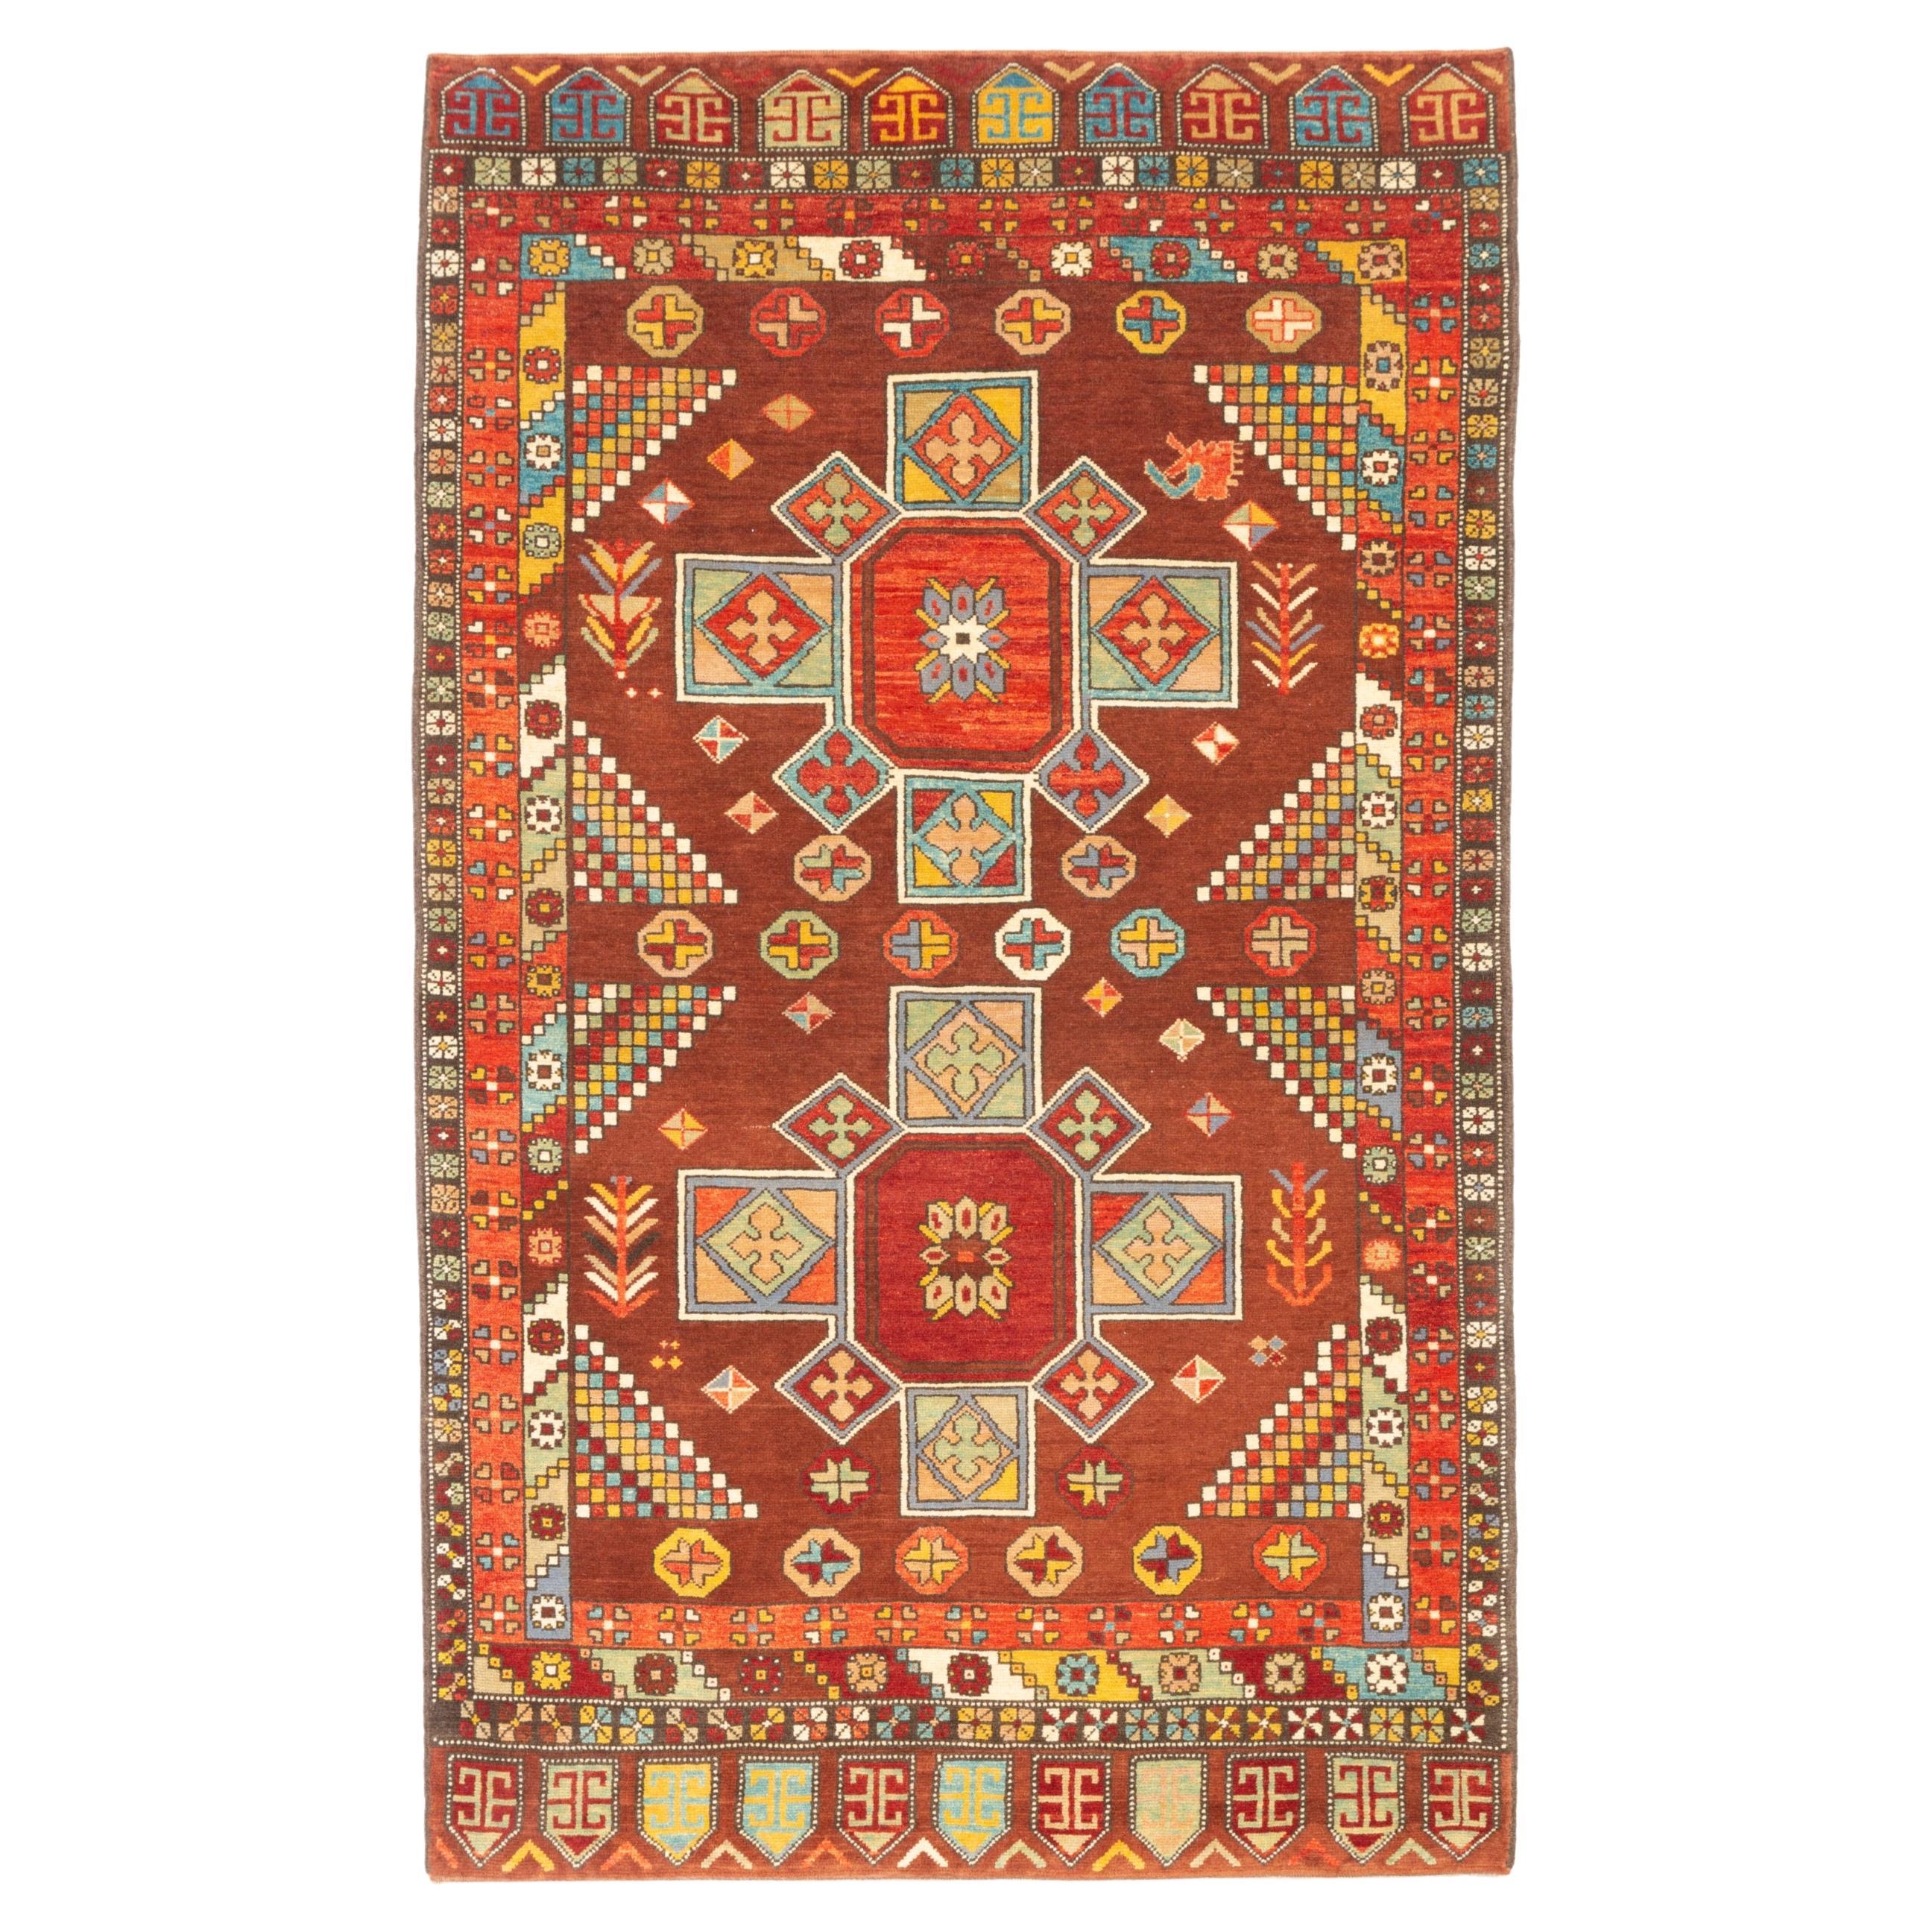 Ararat Rugs Carpet with Two Medallions Anatolian Revival Rug Natural Dyed For Sale